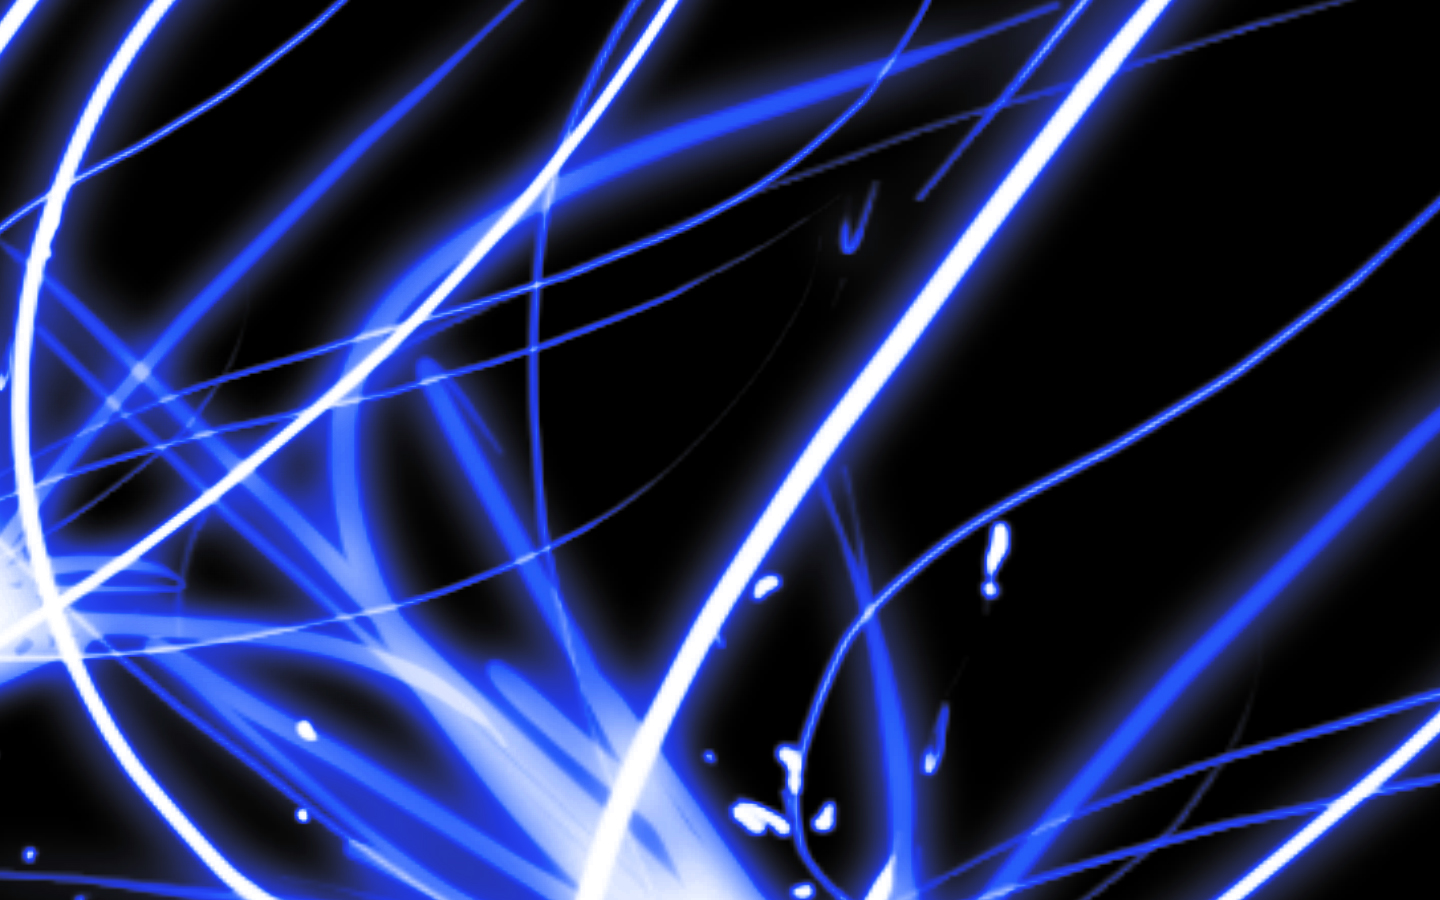 Cool Blue Neon Backgrounds Images amp Pictures   Becuo